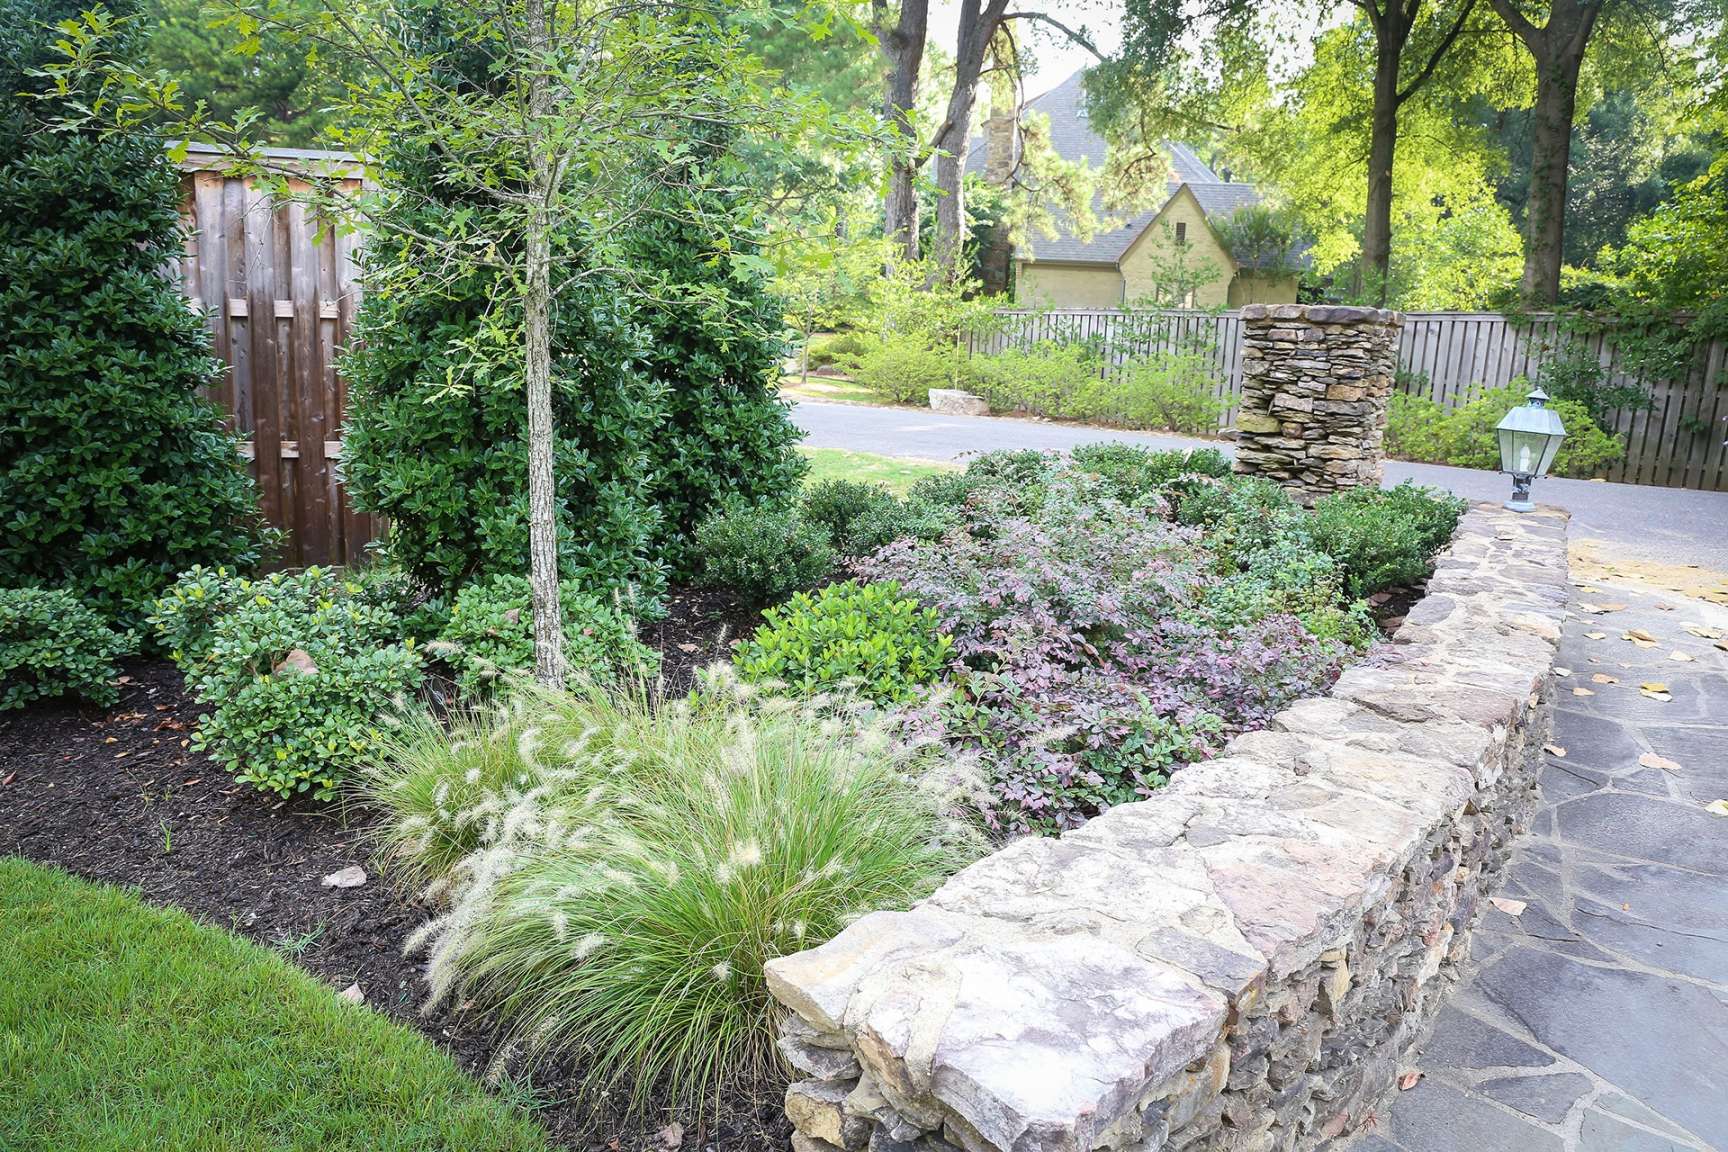 Landscaping Around Parking Areas: Tips for an Attractive and Safe